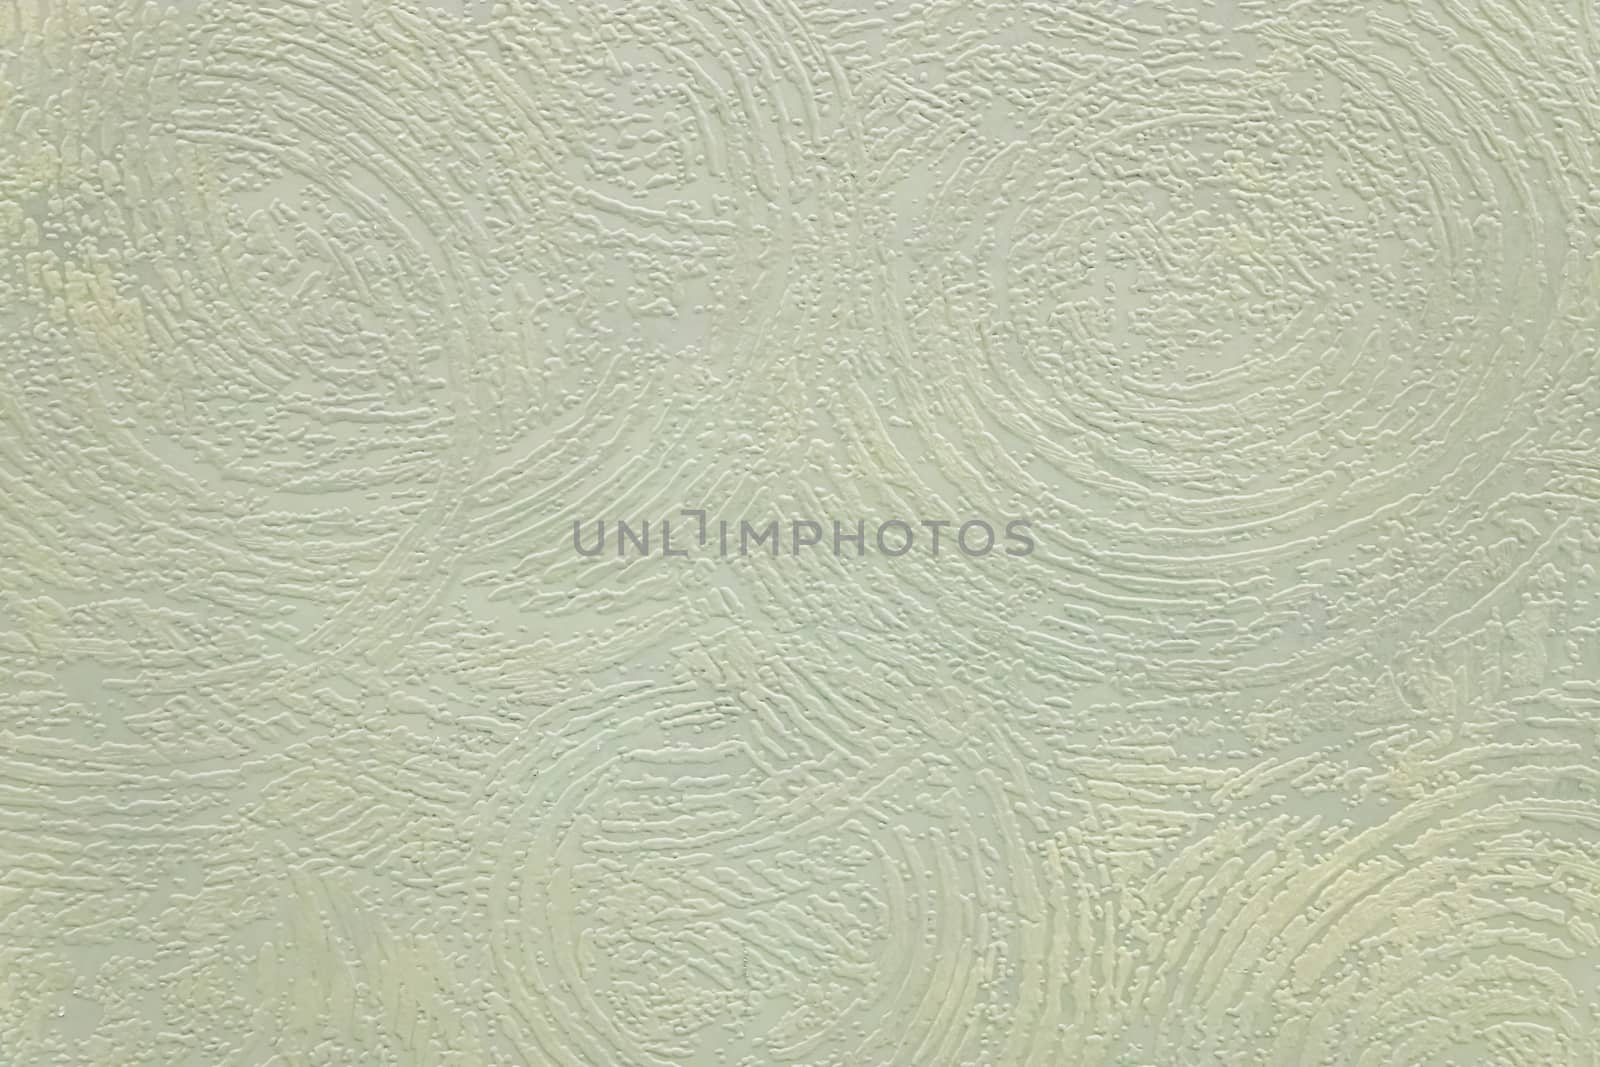 Abstract grungy decorative texture. Textured paper with copy space. Motley green paper surface, texture closeup.